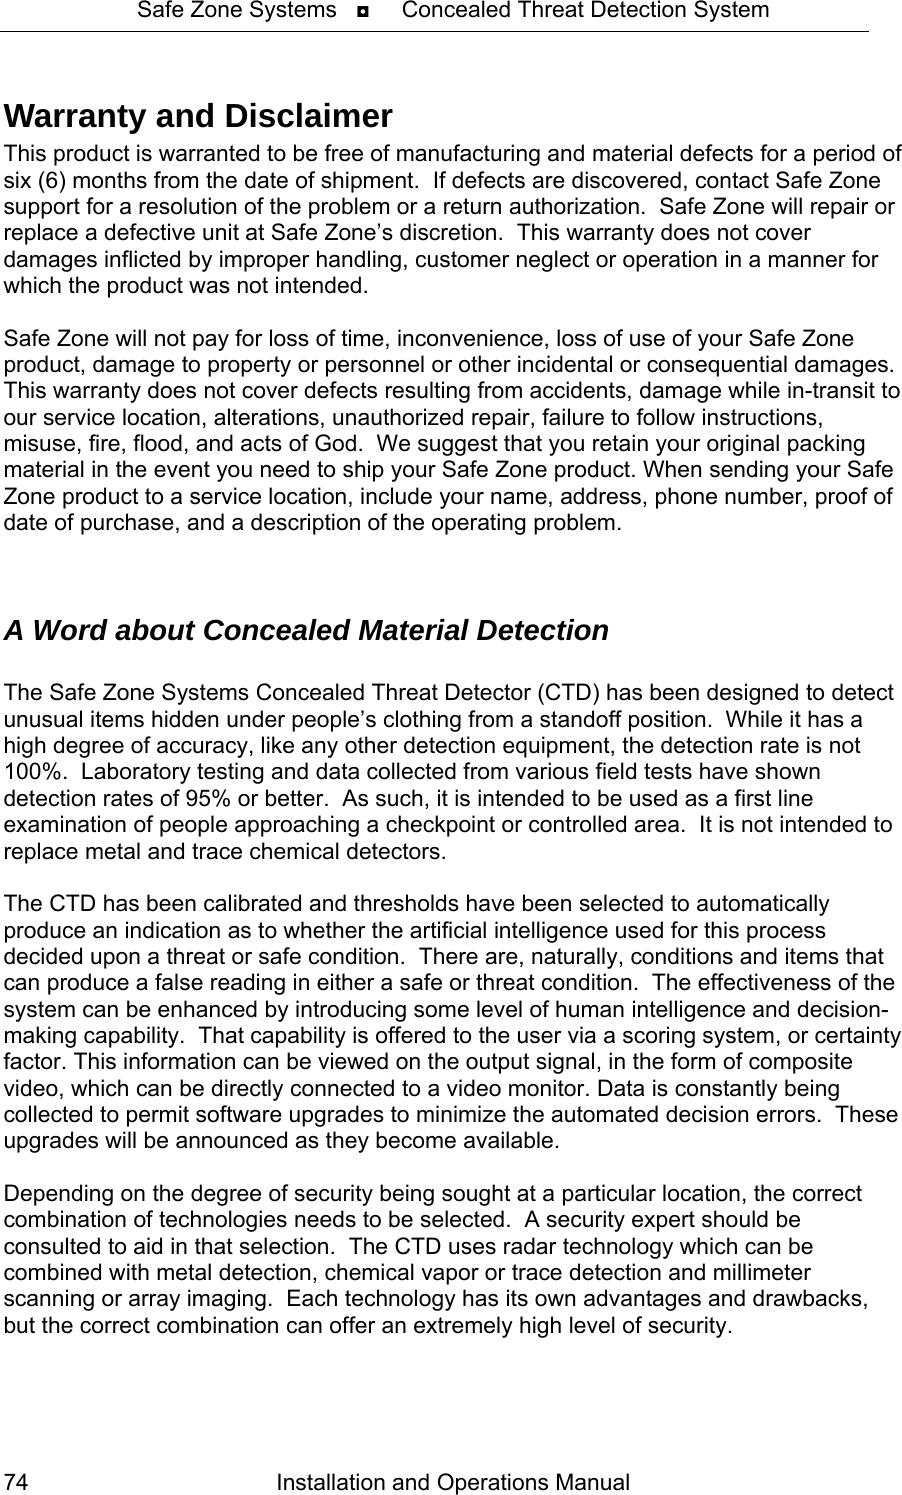 Safe Zone Systems   ◘     Concealed Threat Detection System  Warranty and Disclaimer This product is warranted to be free of manufacturing and material defects for a period of six (6) months from the date of shipment.  If defects are discovered, contact Safe Zone support for a resolution of the problem or a return authorization.  Safe Zone will repair or replace a defective unit at Safe Zone’s discretion.  This warranty does not cover damages inflicted by improper handling, customer neglect or operation in a manner for which the product was not intended.   Safe Zone will not pay for loss of time, inconvenience, loss of use of your Safe Zone product, damage to property or personnel or other incidental or consequential damages. This warranty does not cover defects resulting from accidents, damage while in-transit to our service location, alterations, unauthorized repair, failure to follow instructions, misuse, fire, flood, and acts of God.  We suggest that you retain your original packing material in the event you need to ship your Safe Zone product. When sending your Safe Zone product to a service location, include your name, address, phone number, proof of date of purchase, and a description of the operating problem.    A Word about Concealed Material Detection  The Safe Zone Systems Concealed Threat Detector (CTD) has been designed to detect unusual items hidden under people’s clothing from a standoff position.  While it has a high degree of accuracy, like any other detection equipment, the detection rate is not 100%.  Laboratory testing and data collected from various field tests have shown detection rates of 95% or better.  As such, it is intended to be used as a first line examination of people approaching a checkpoint or controlled area.  It is not intended to replace metal and trace chemical detectors.   The CTD has been calibrated and thresholds have been selected to automatically produce an indication as to whether the artificial intelligence used for this process decided upon a threat or safe condition.  There are, naturally, conditions and items that can produce a false reading in either a safe or threat condition.  The effectiveness of the system can be enhanced by introducing some level of human intelligence and decision-making capability.  That capability is offered to the user via a scoring system, or certainty factor. This information can be viewed on the output signal, in the form of composite video, which can be directly connected to a video monitor. Data is constantly being collected to permit software upgrades to minimize the automated decision errors.  These upgrades will be announced as they become available.    Depending on the degree of security being sought at a particular location, the correct combination of technologies needs to be selected.  A security expert should be consulted to aid in that selection.  The CTD uses radar technology which can be combined with metal detection, chemical vapor or trace detection and millimeter scanning or array imaging.  Each technology has its own advantages and drawbacks, but the correct combination can offer an extremely high level of security.  Installation and Operations Manual 74 